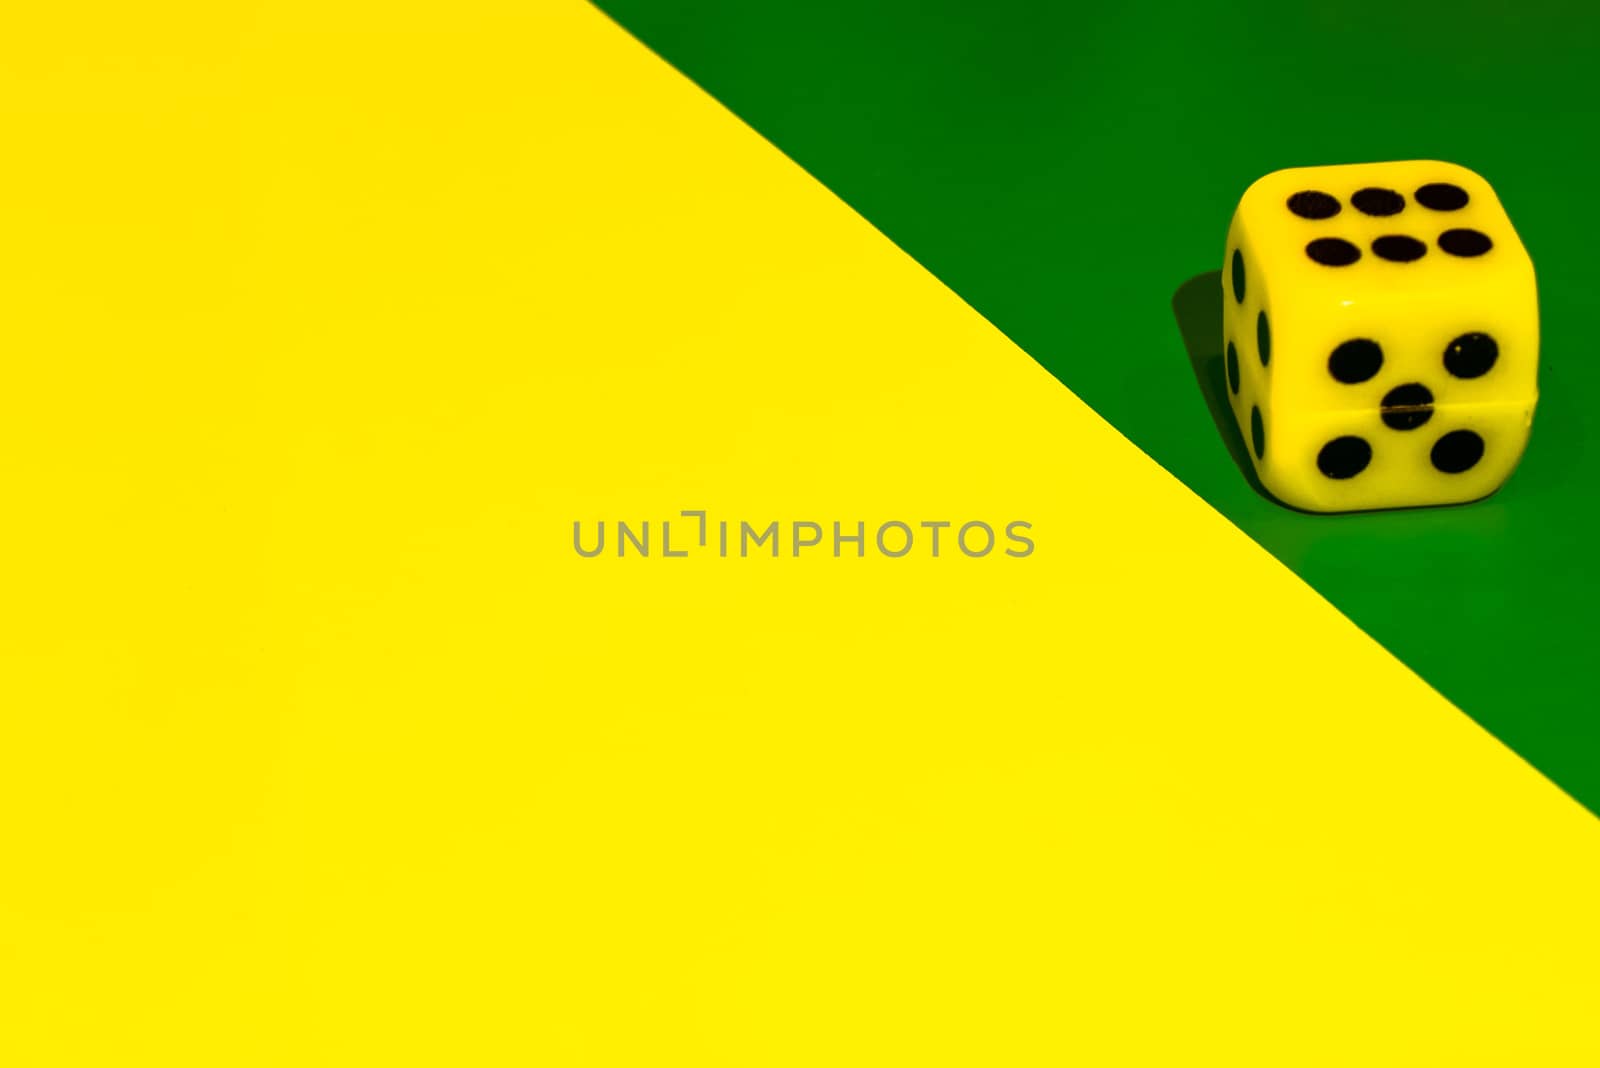 white and yellow dice on a combined green and yellow background